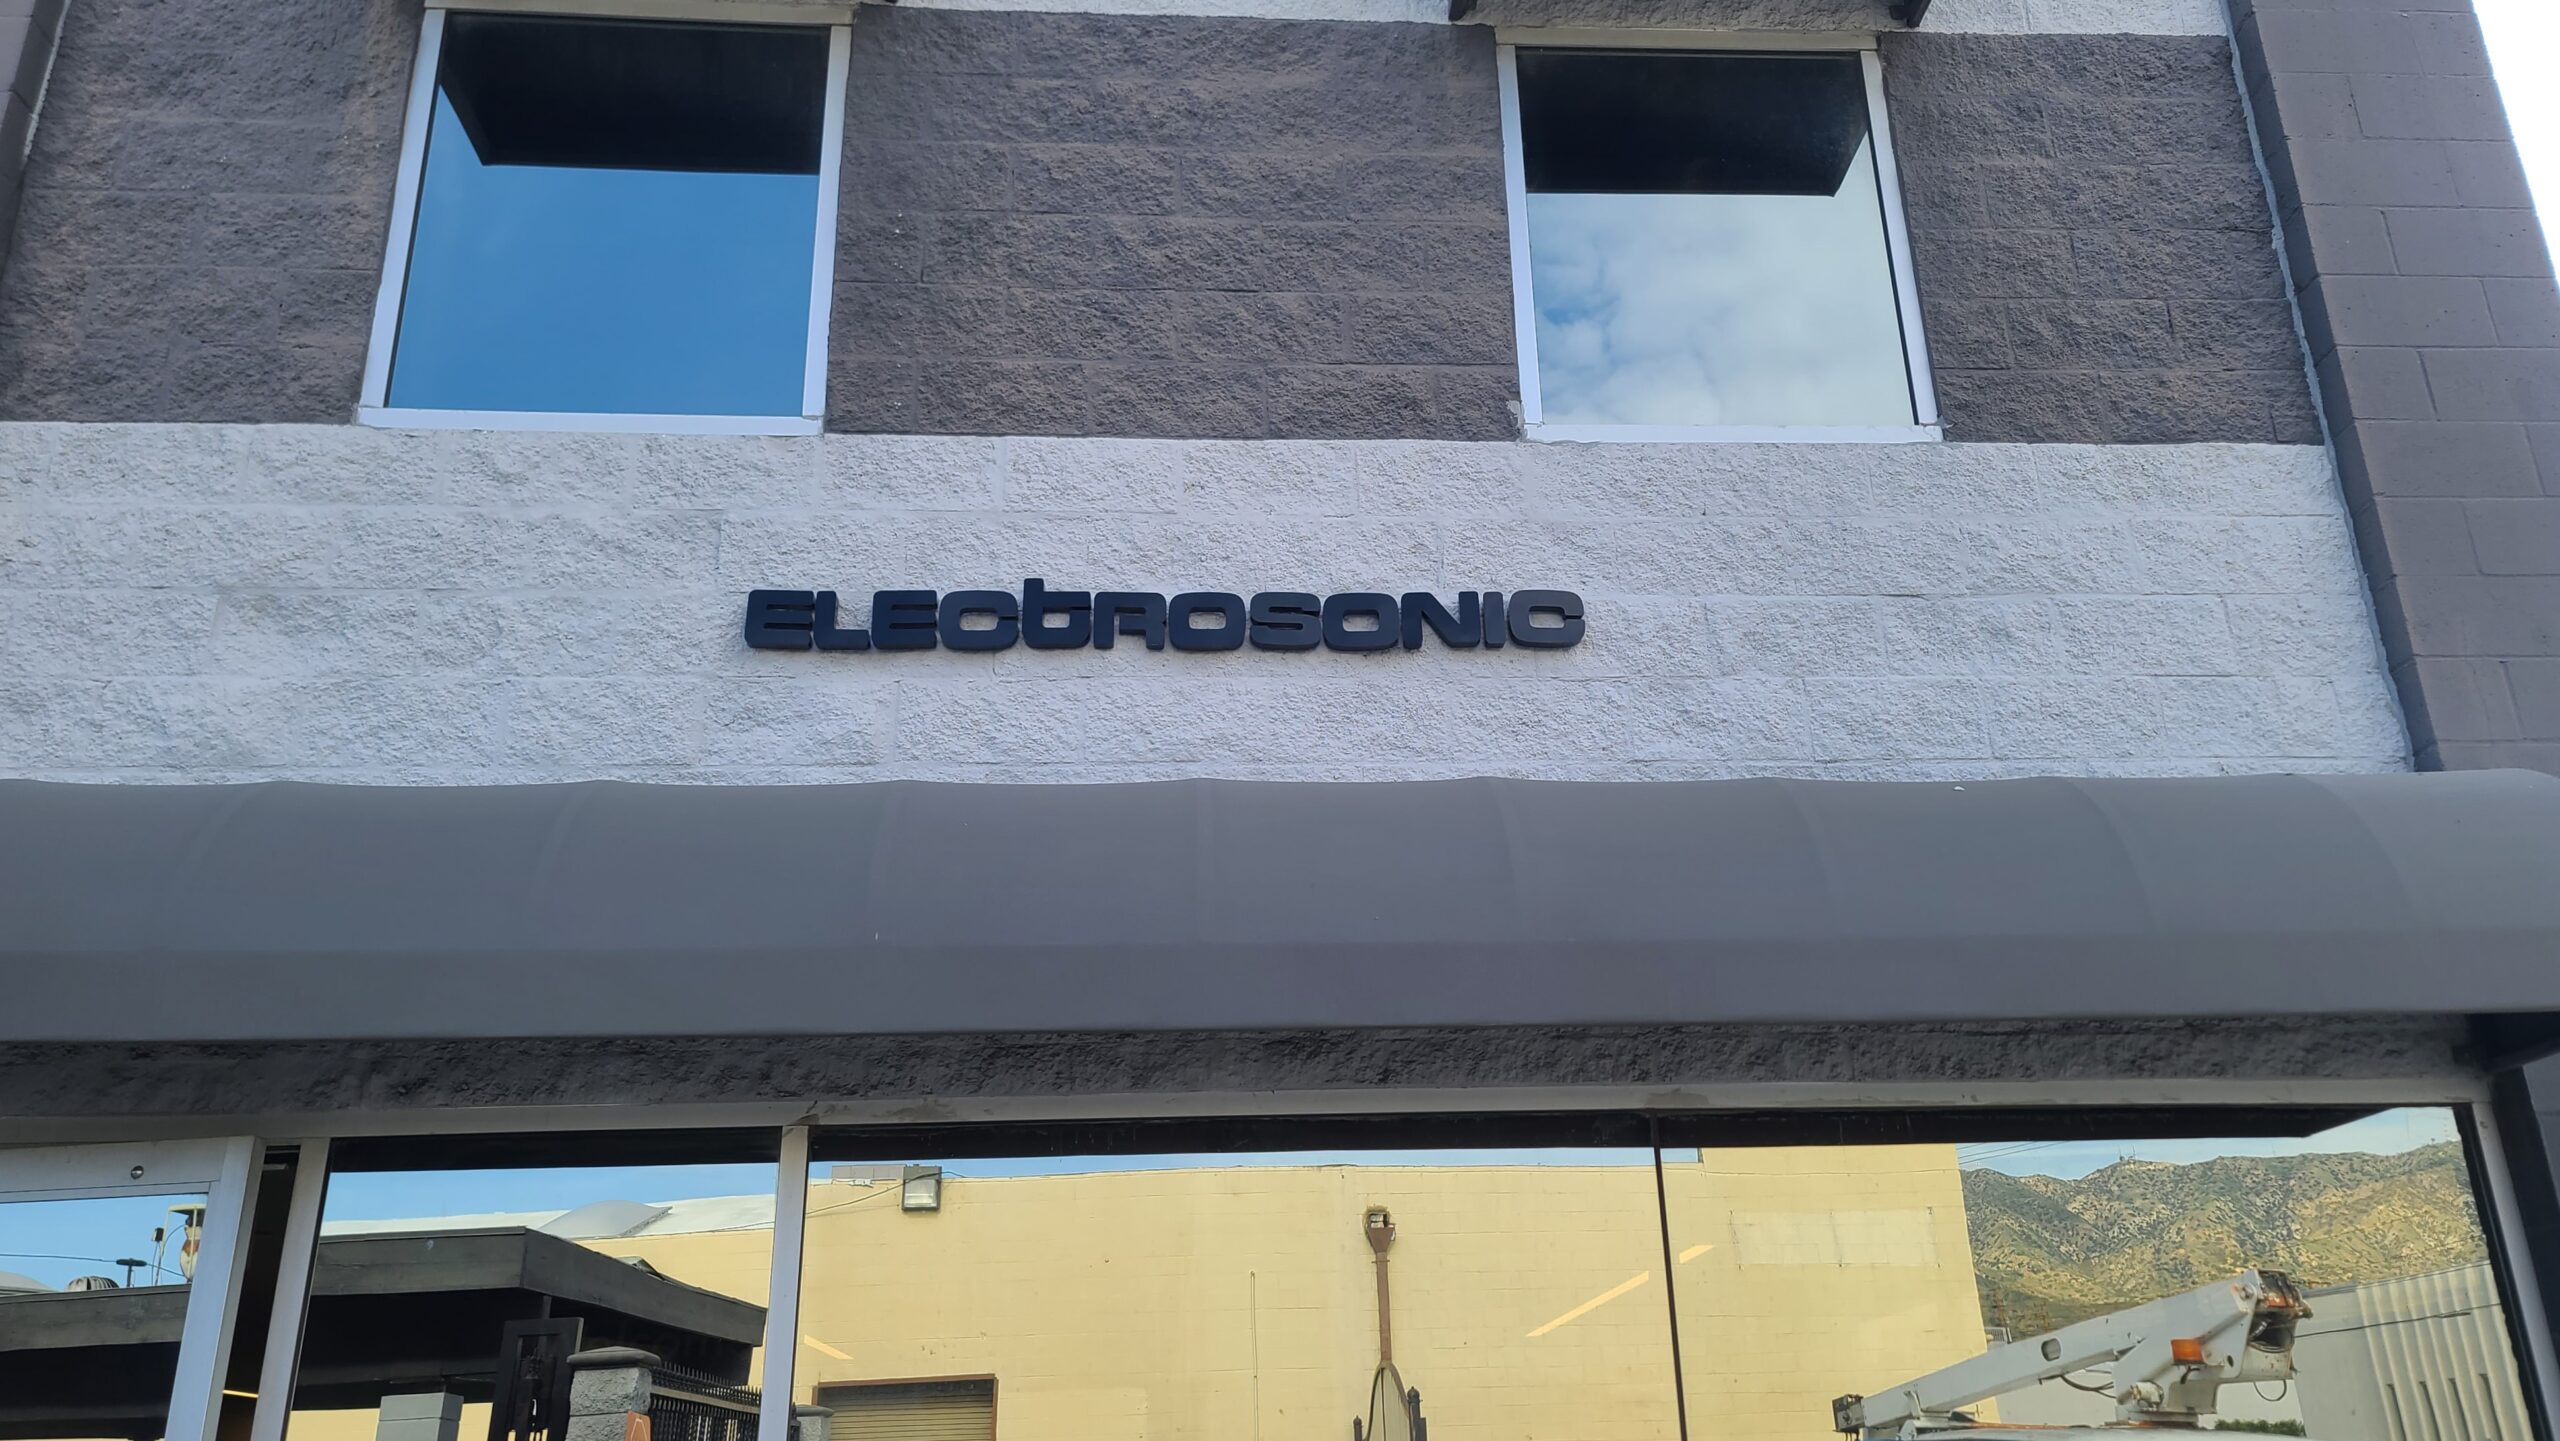 These sleek stainless steel building signs for Electrosonic's Burbank location are imposing sights that will impress clients.